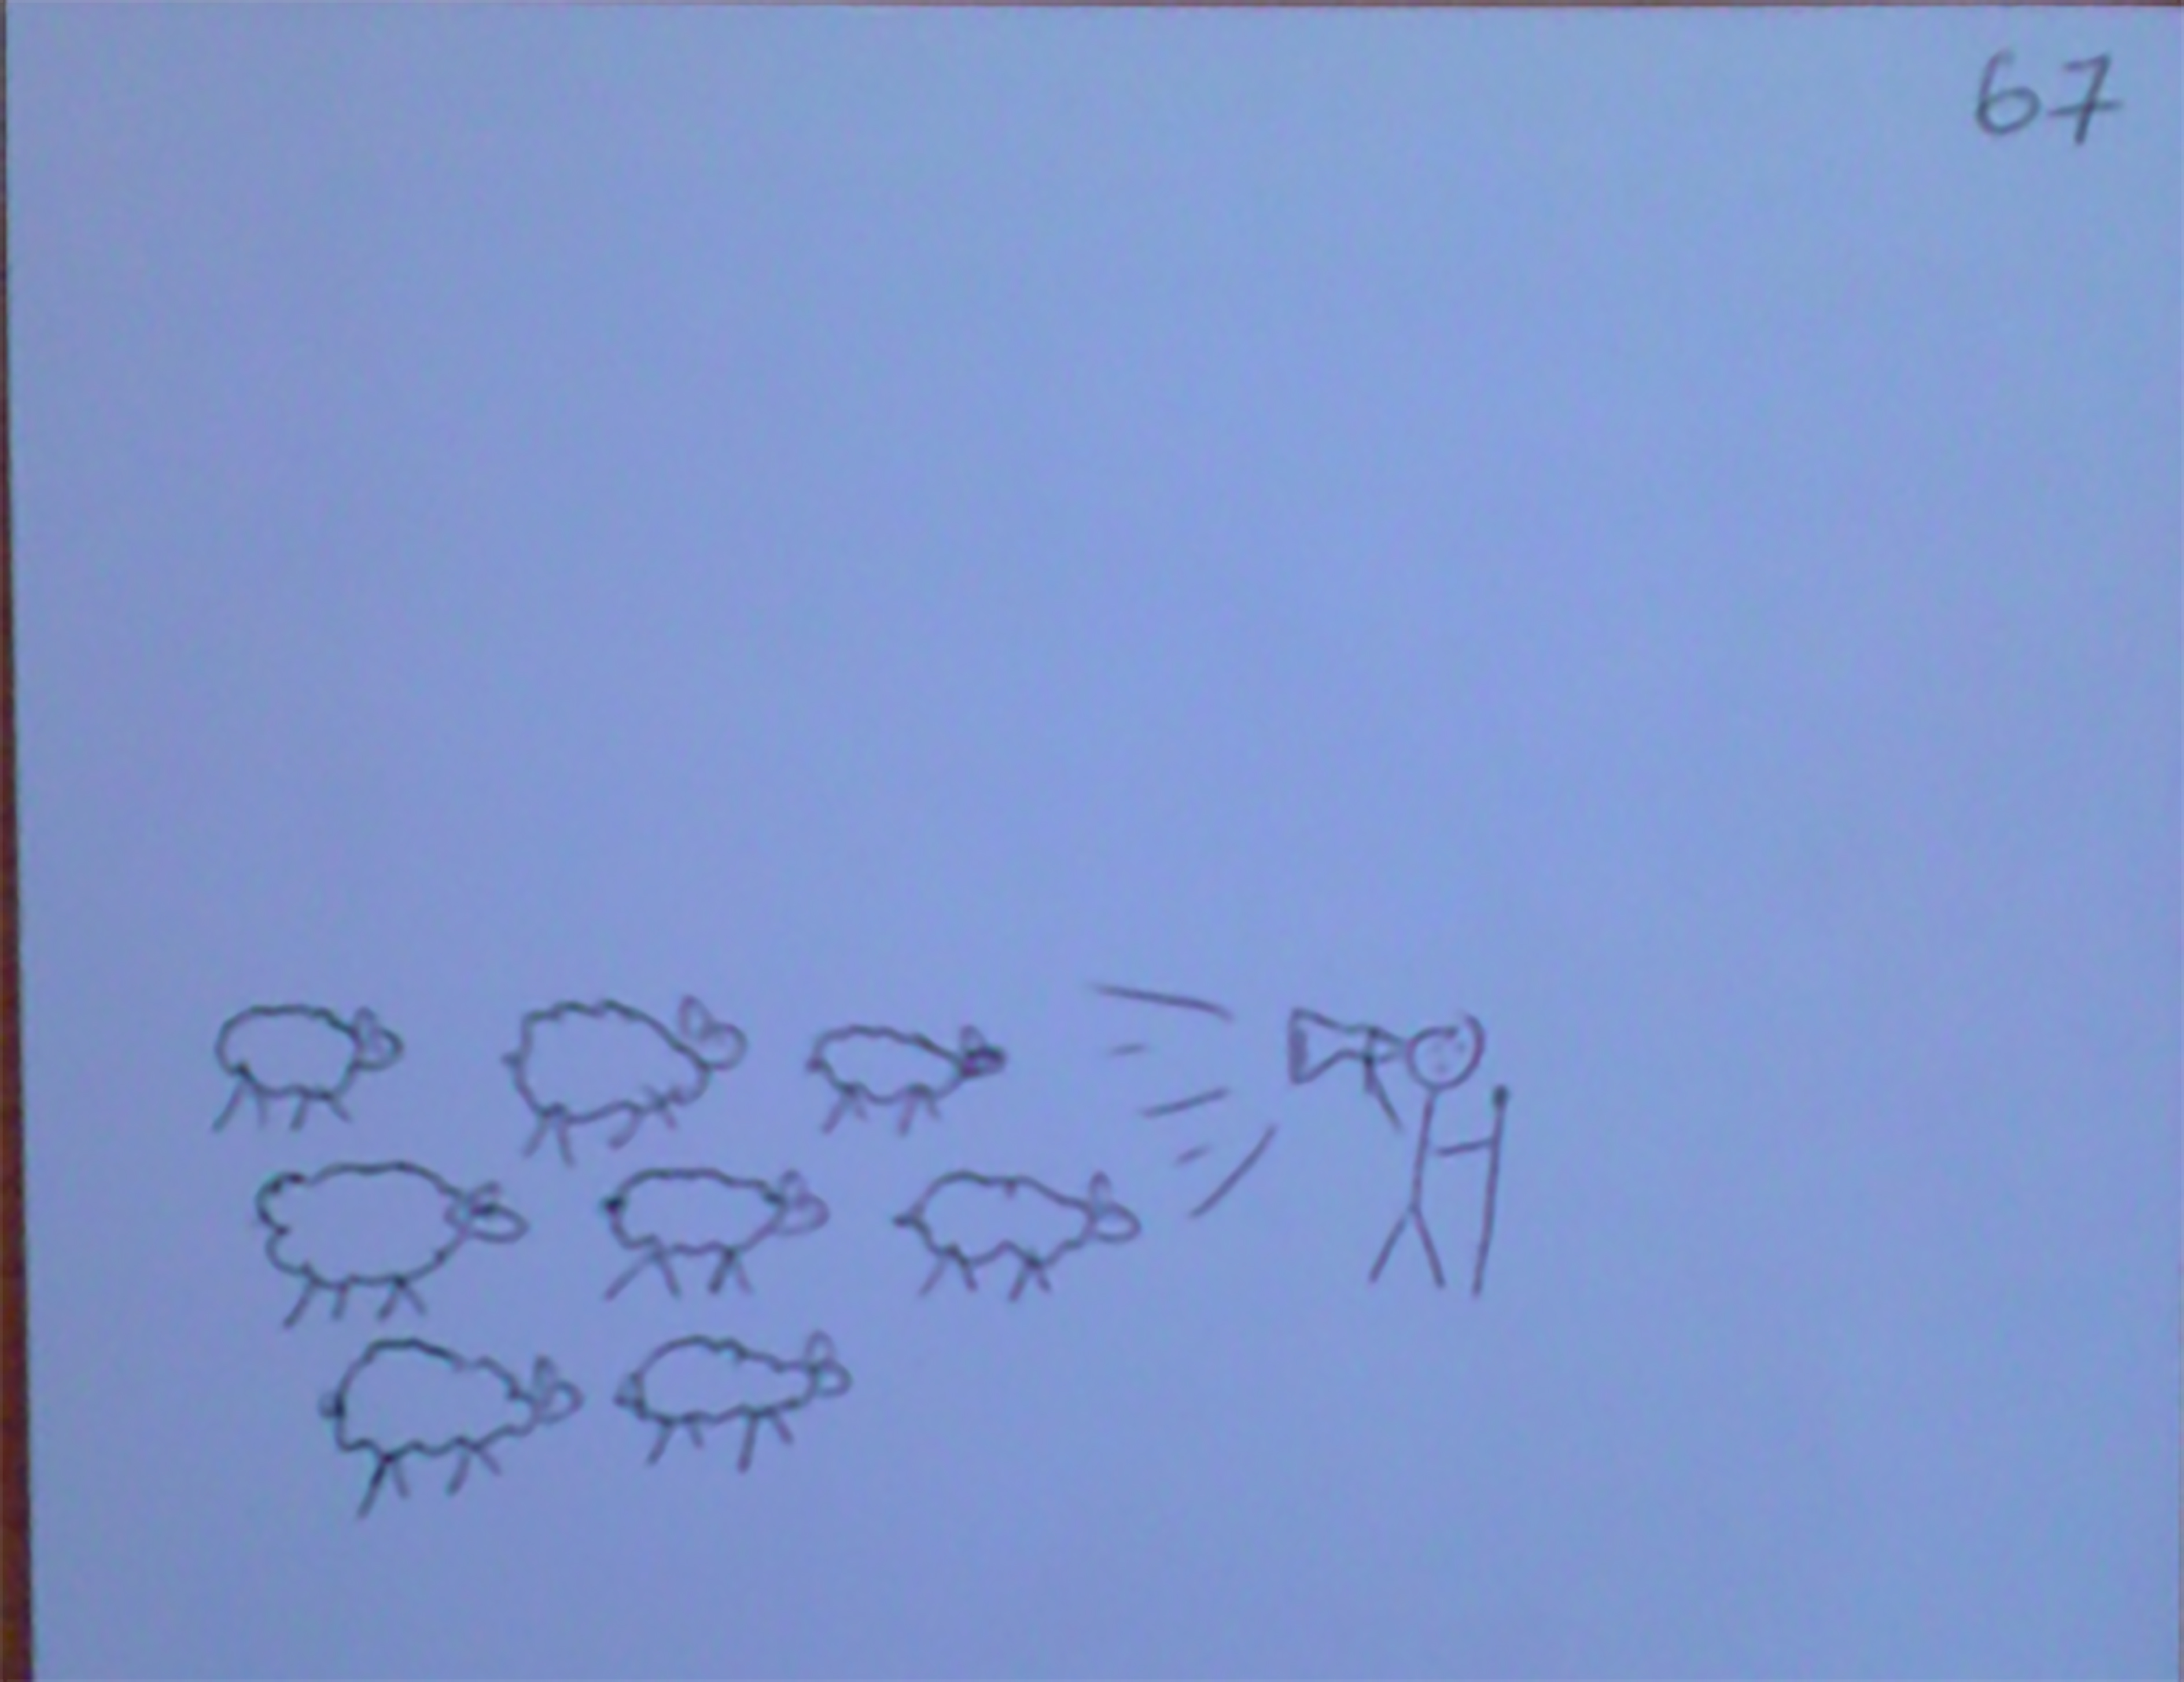 cSquare 67 depicting “sheperd-flock” or opinion leader phenomenon.